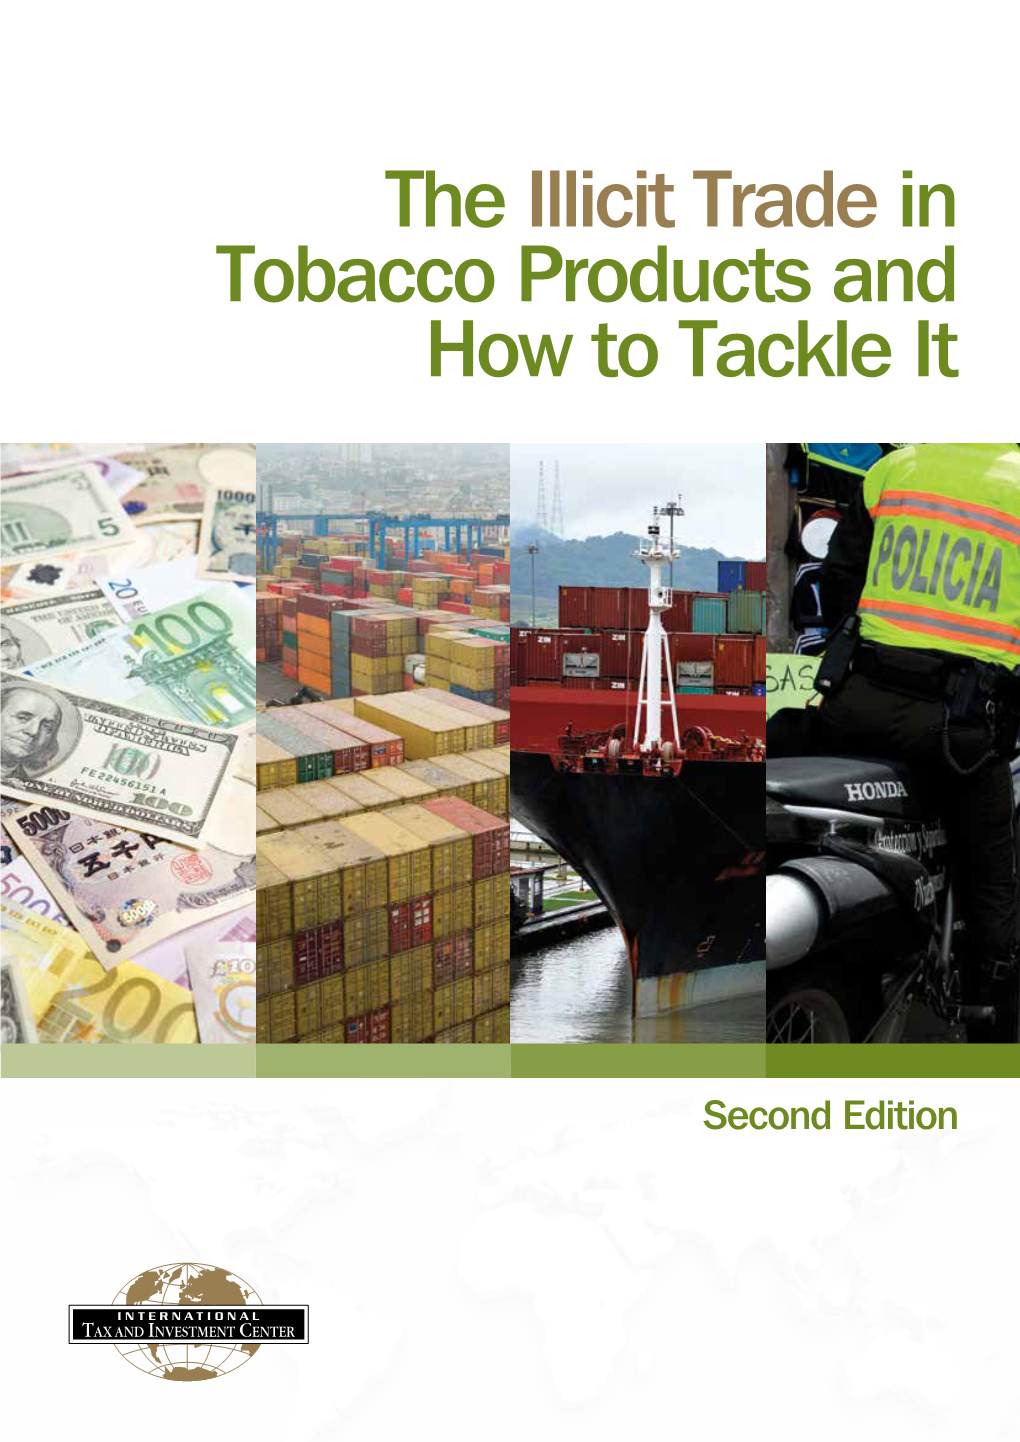 The Illicit Trade in Tobacco Products and How to Tackle It